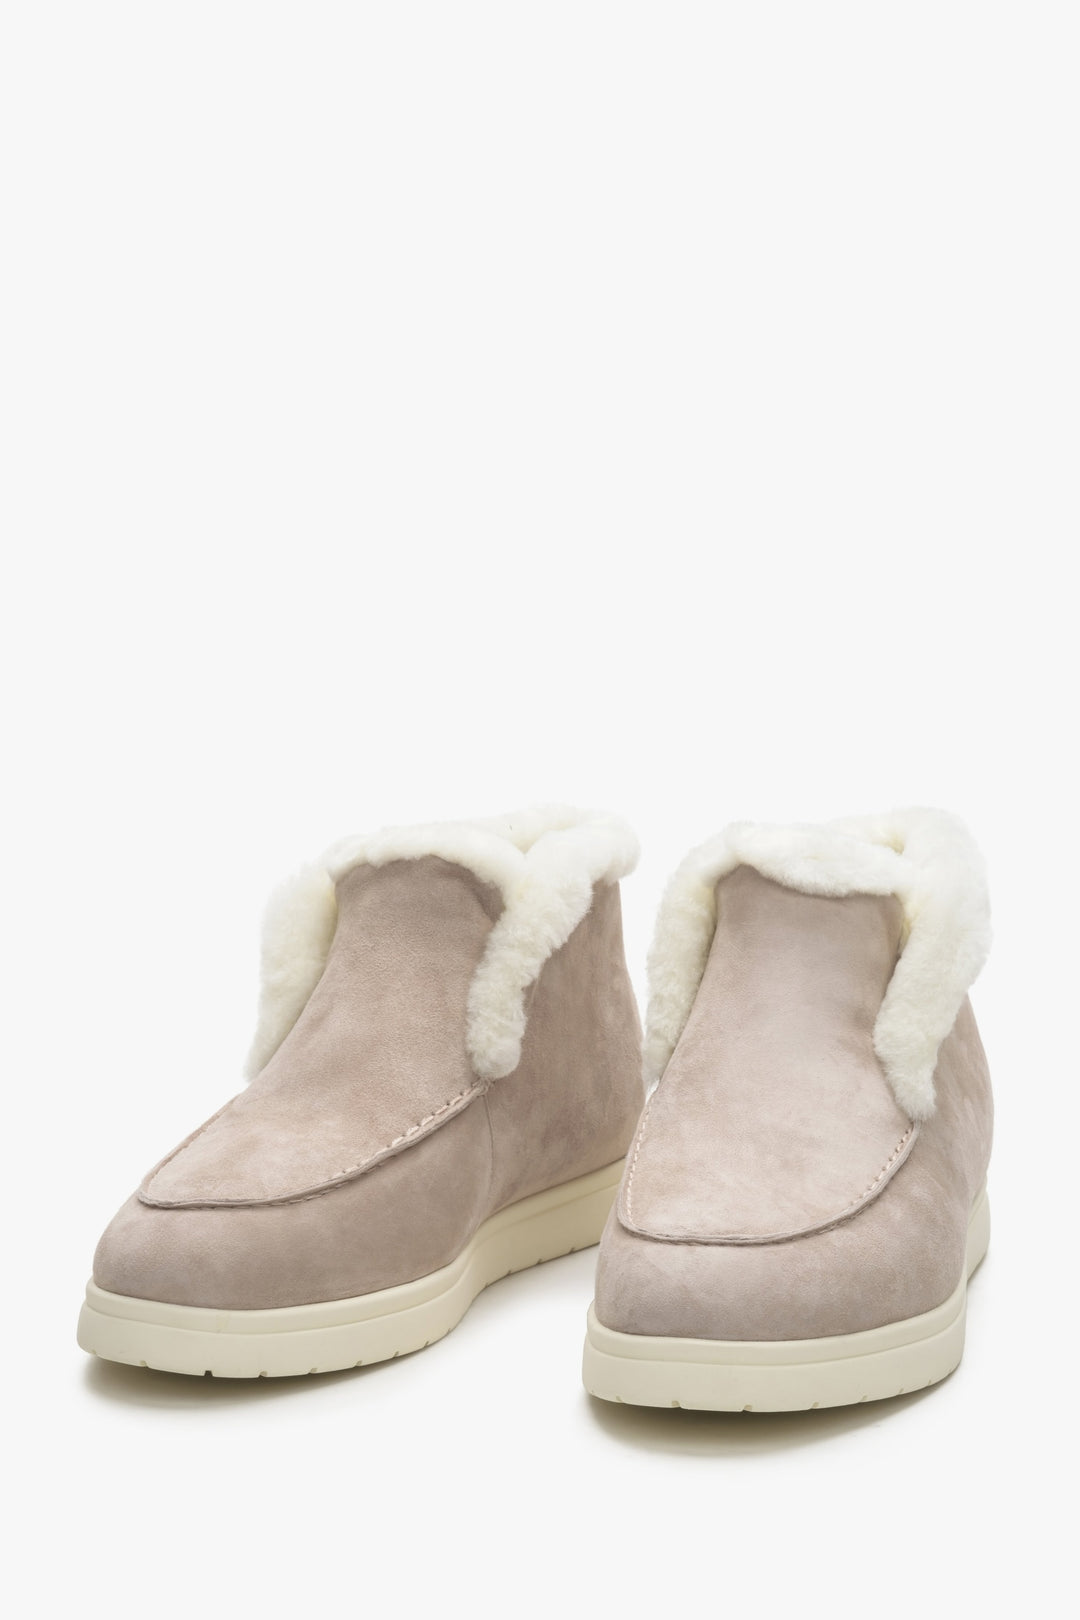 Low-top pale pink slip on boots Estro with fur lining - presentation of the tip of the toes.